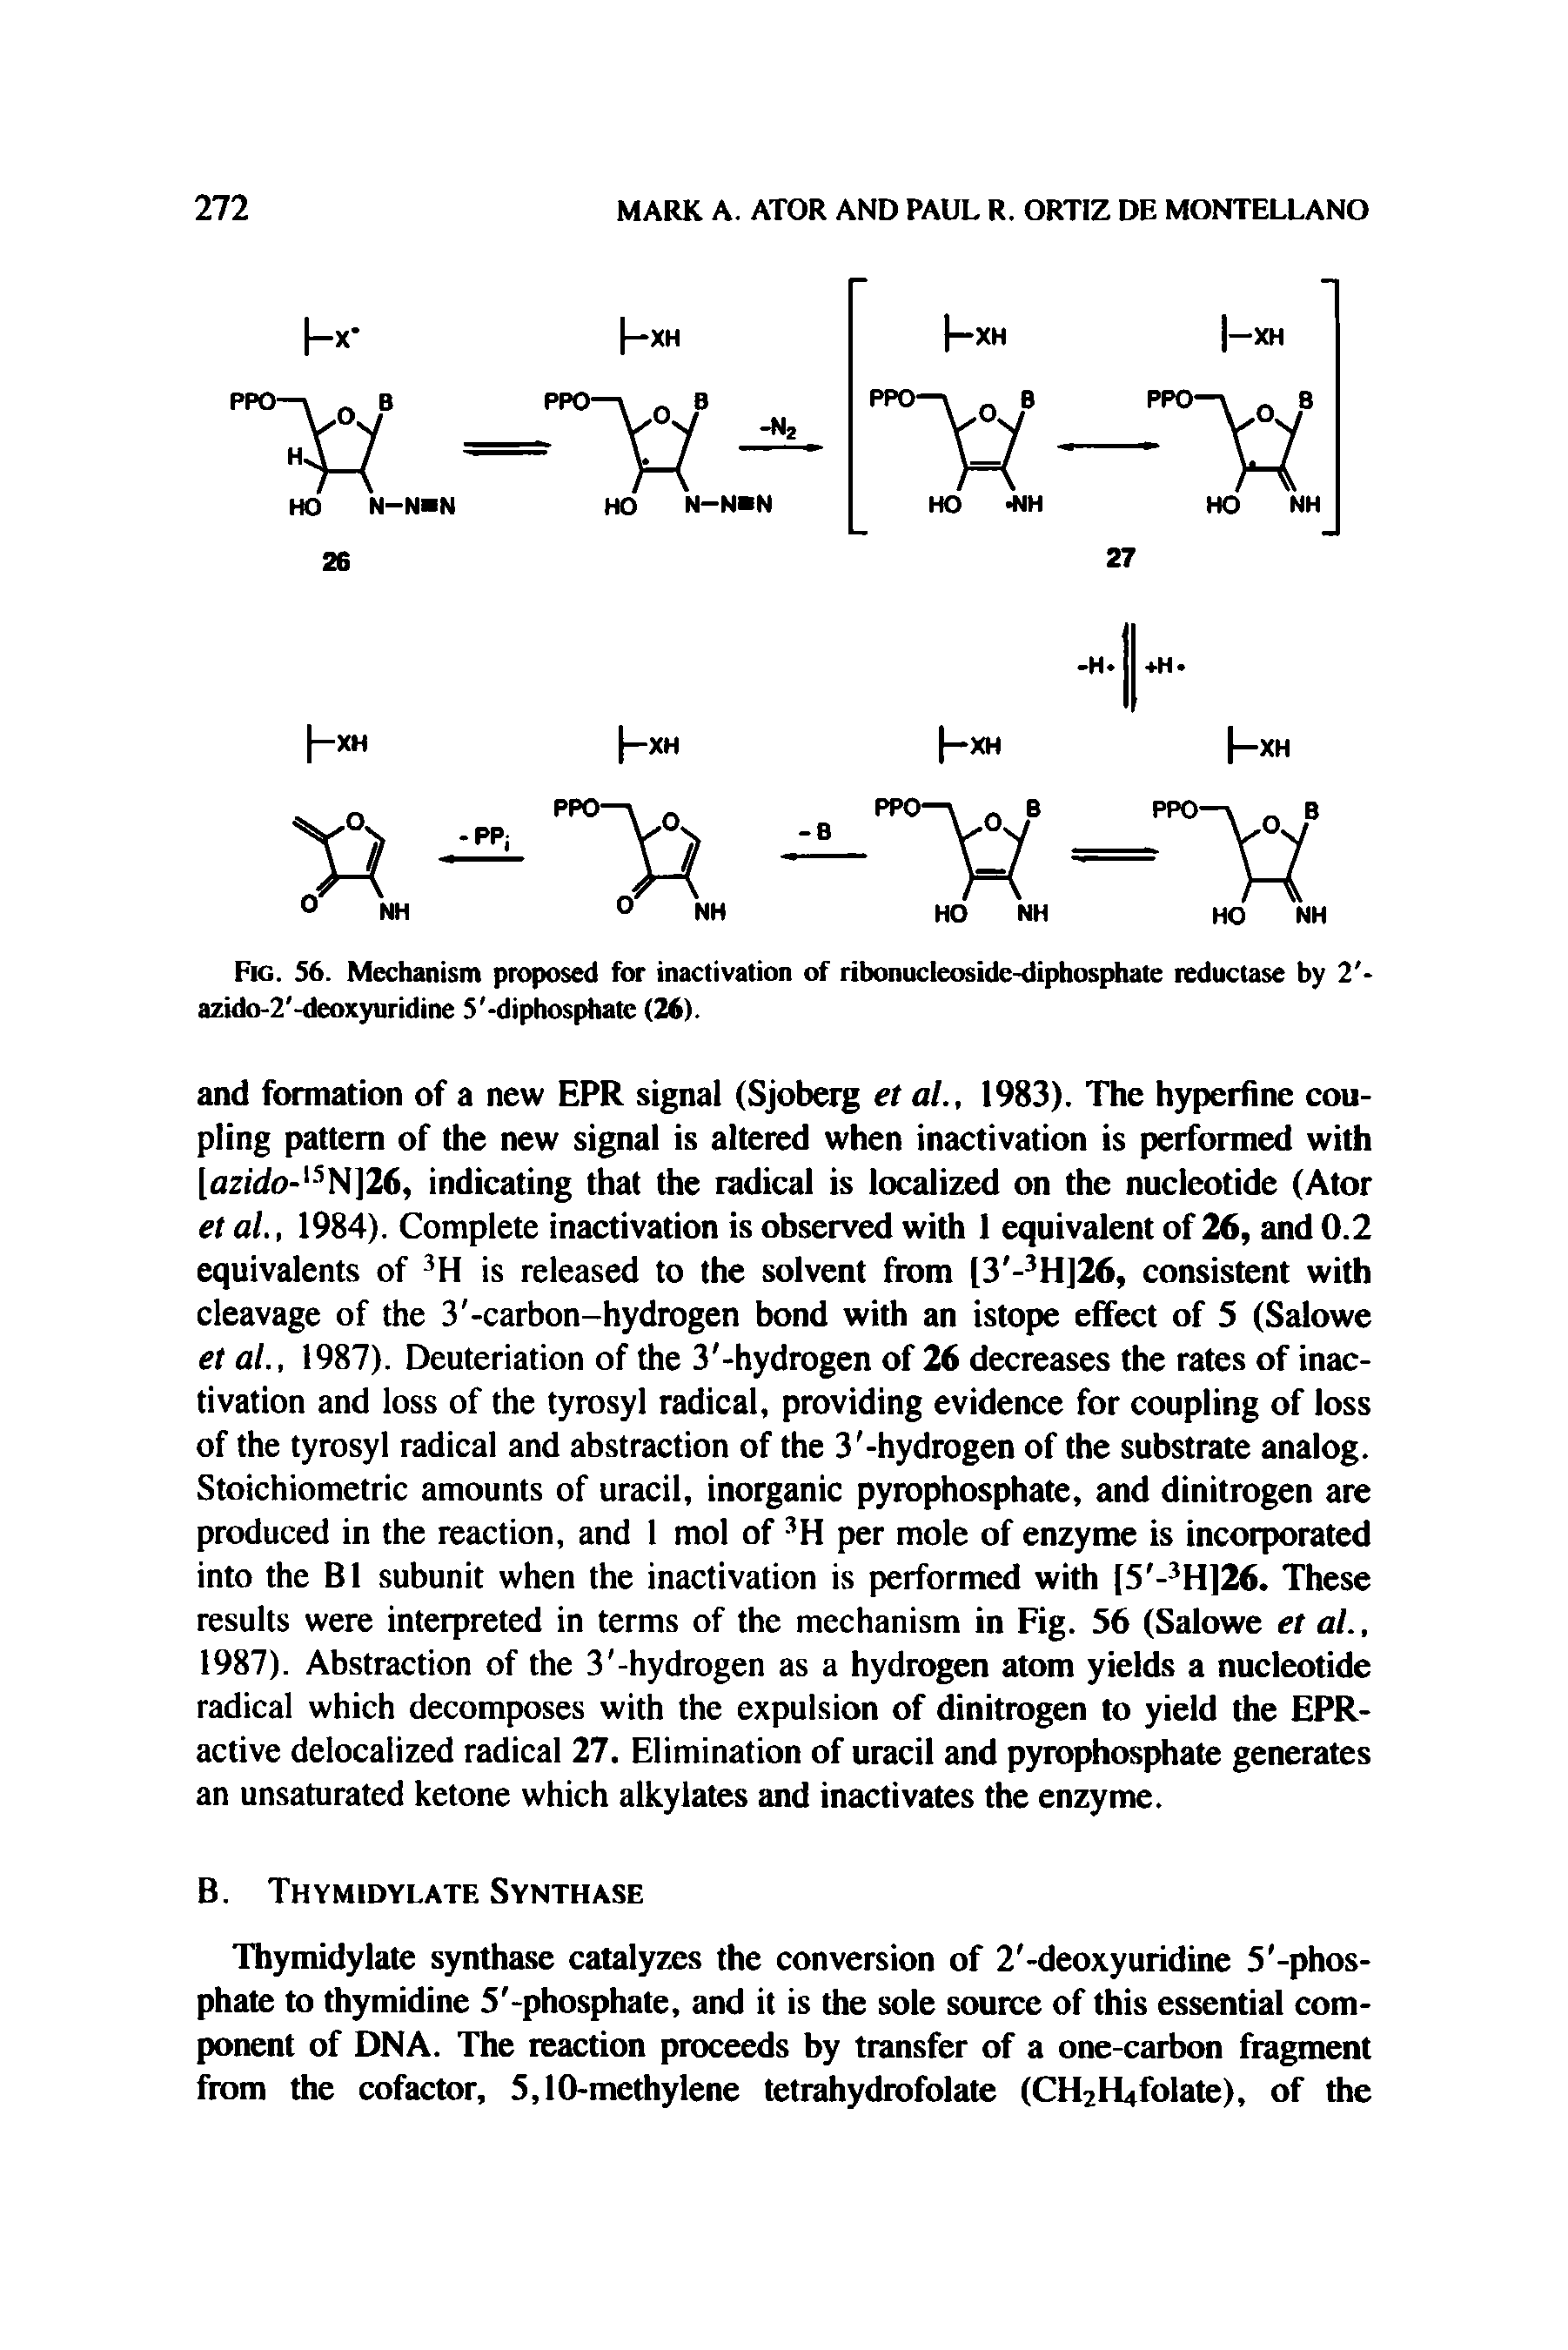 Fig. 56. Mechanism proposed for inactivation of ribonucleoside-diphosphate reductase by 2 -azido-2 -deoxyuridine 5 -diphosphate (26).